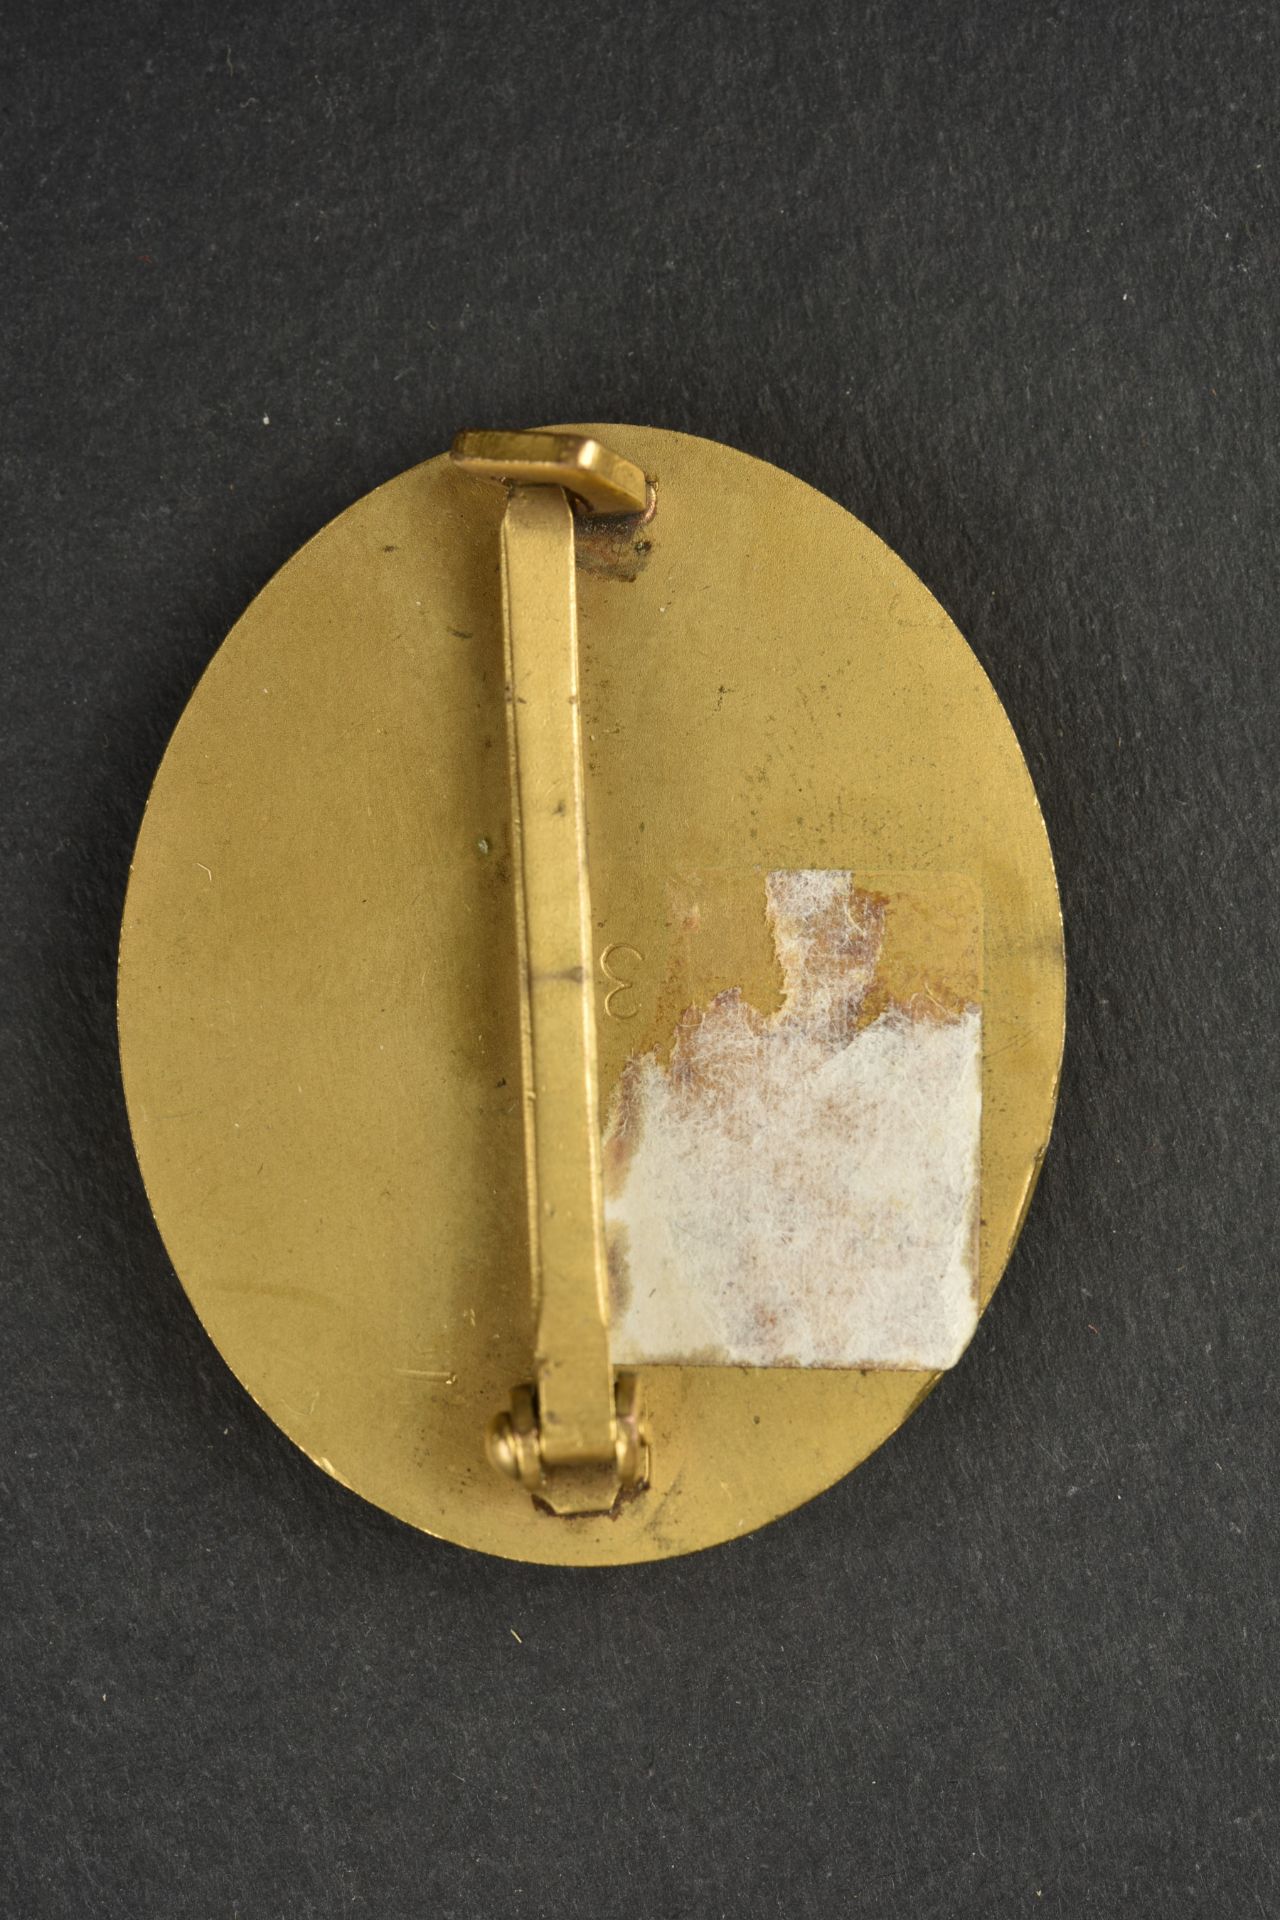 Insigne des blesses or. Gold wounded badge. - Image 2 of 2